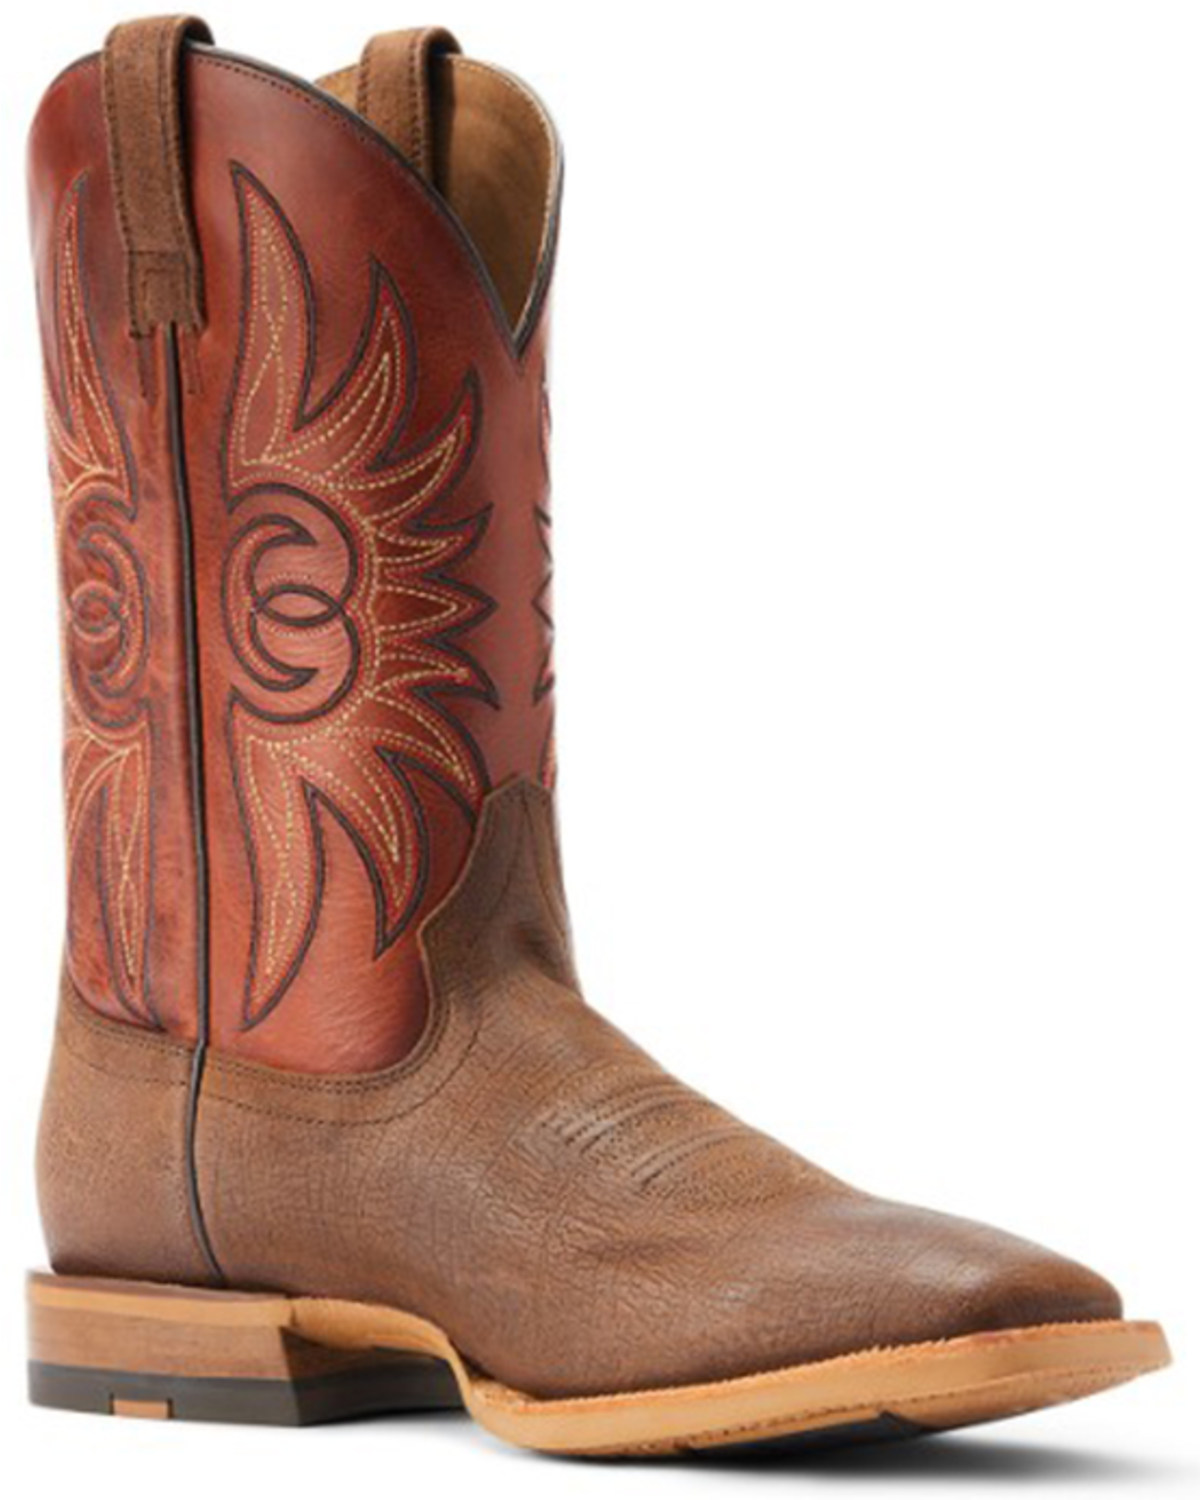 Ariat Men's Arena Winner Western Performance Boots - Broad Square Toe